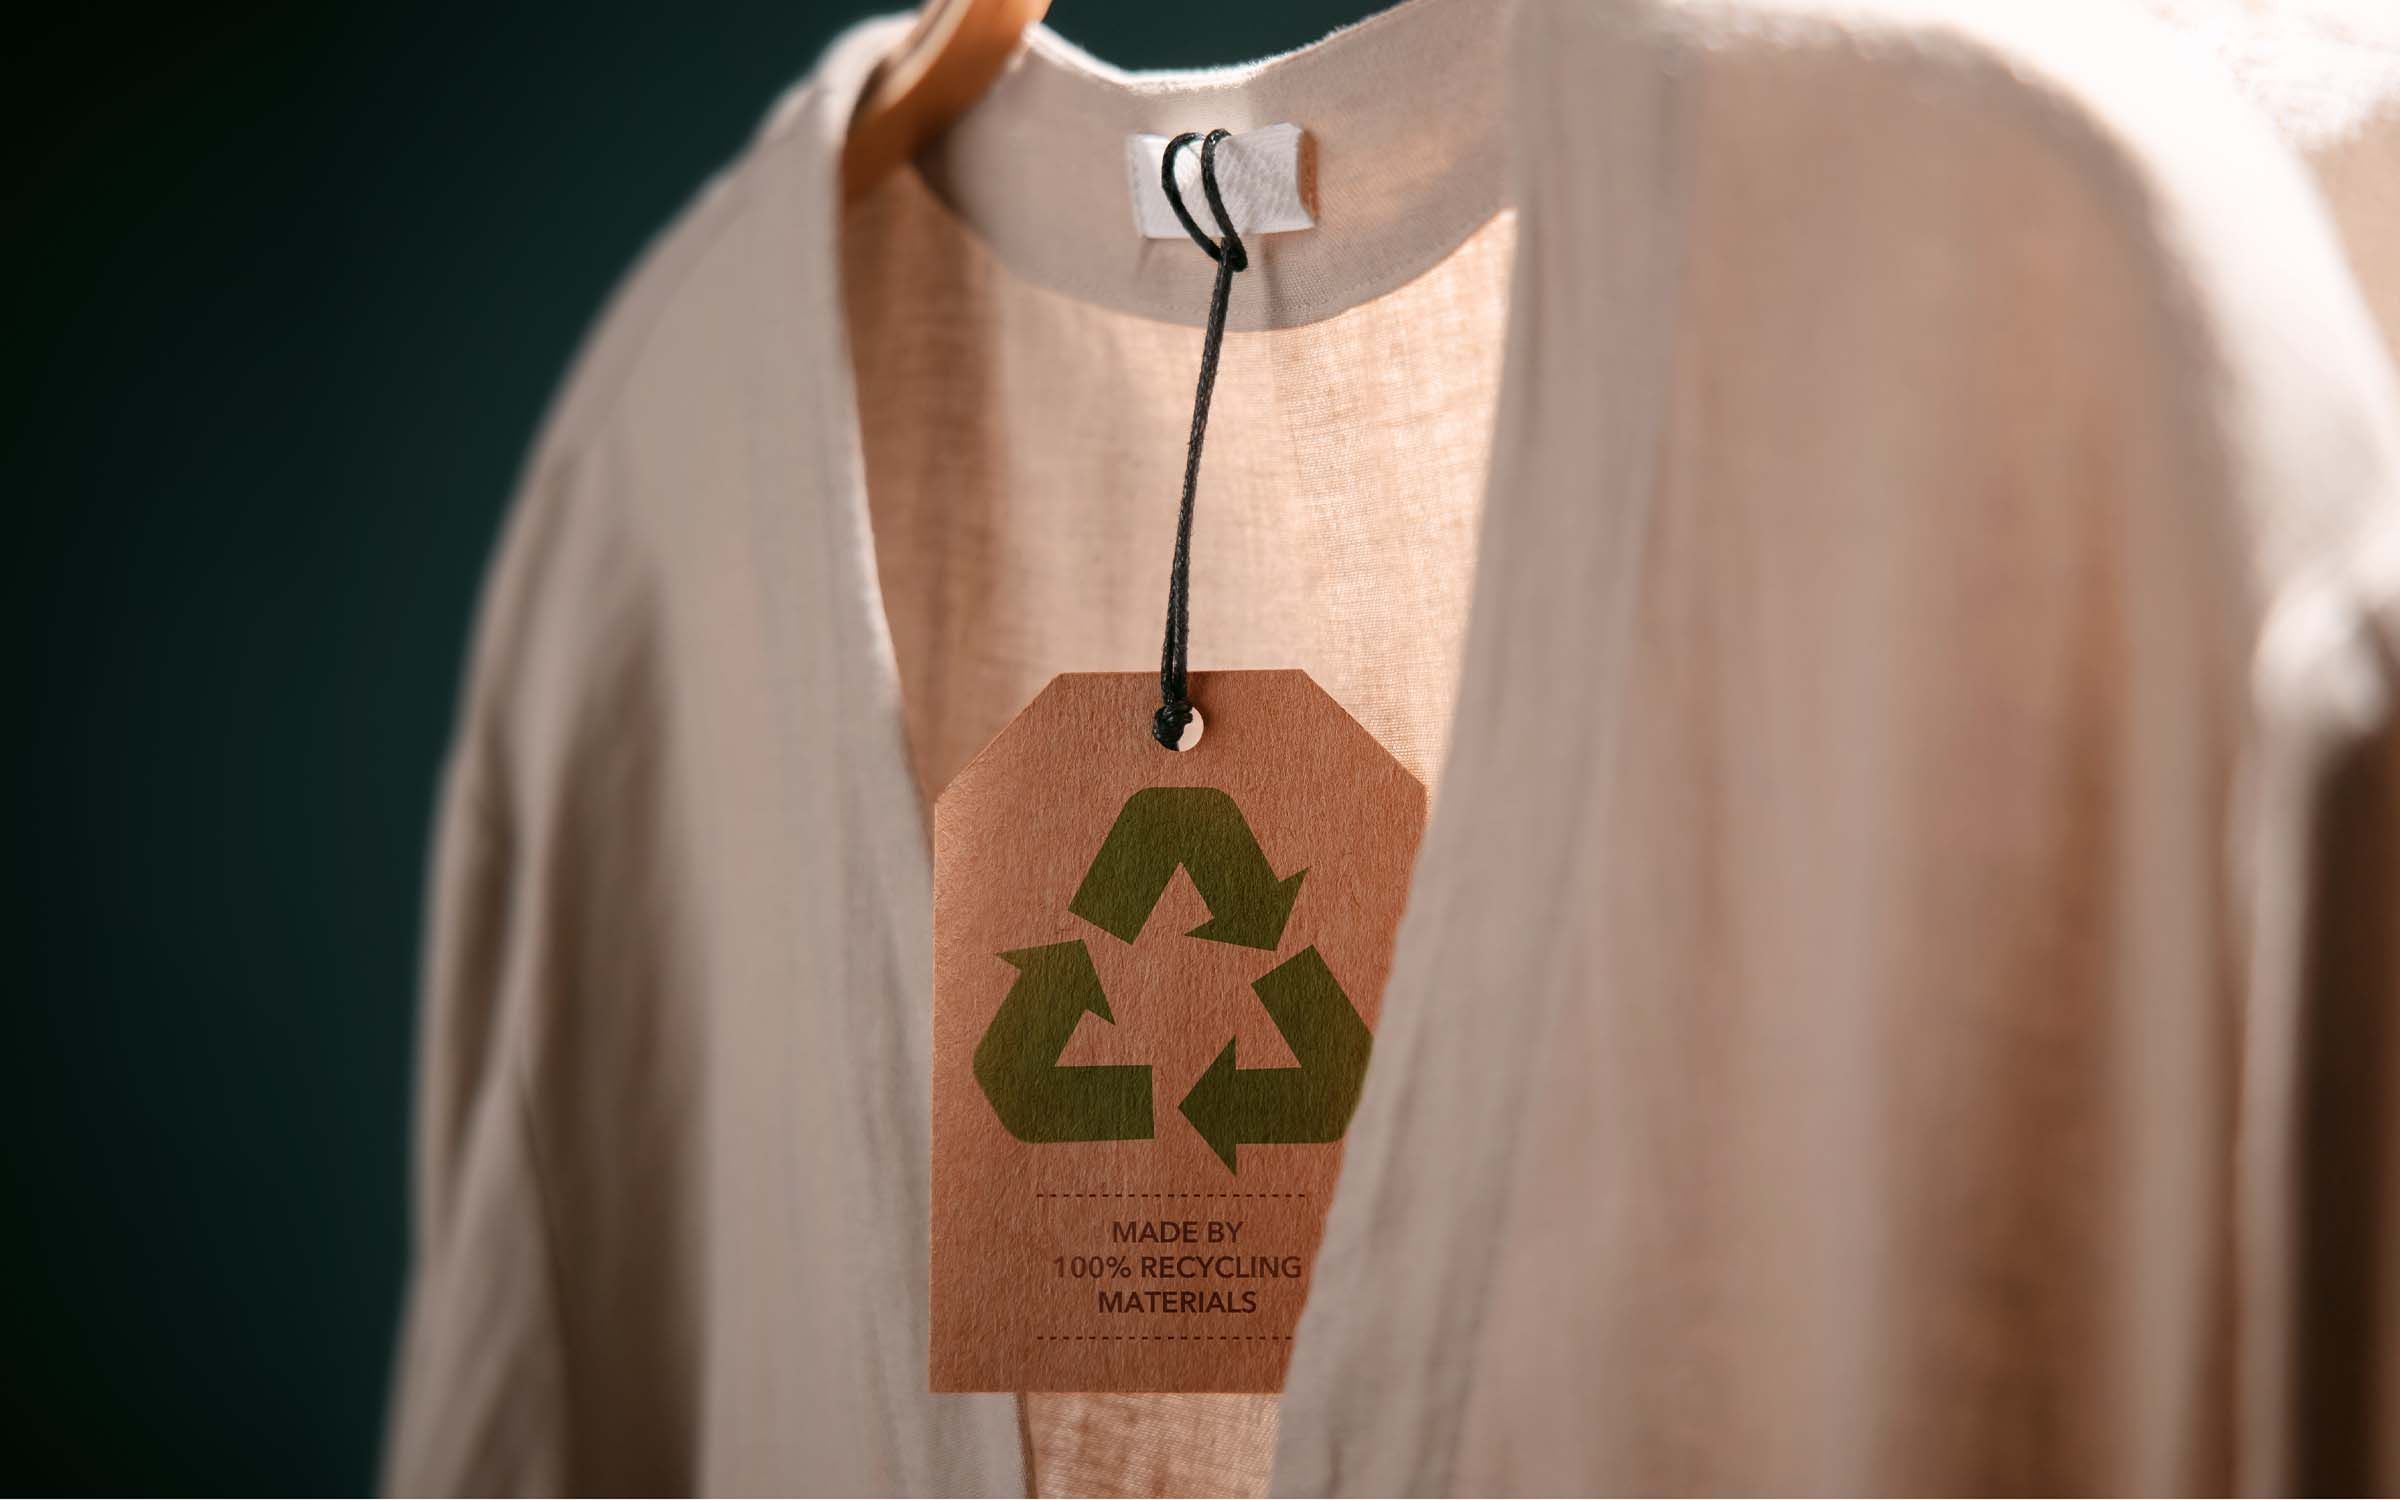 Dressing Up the Sustainable Way